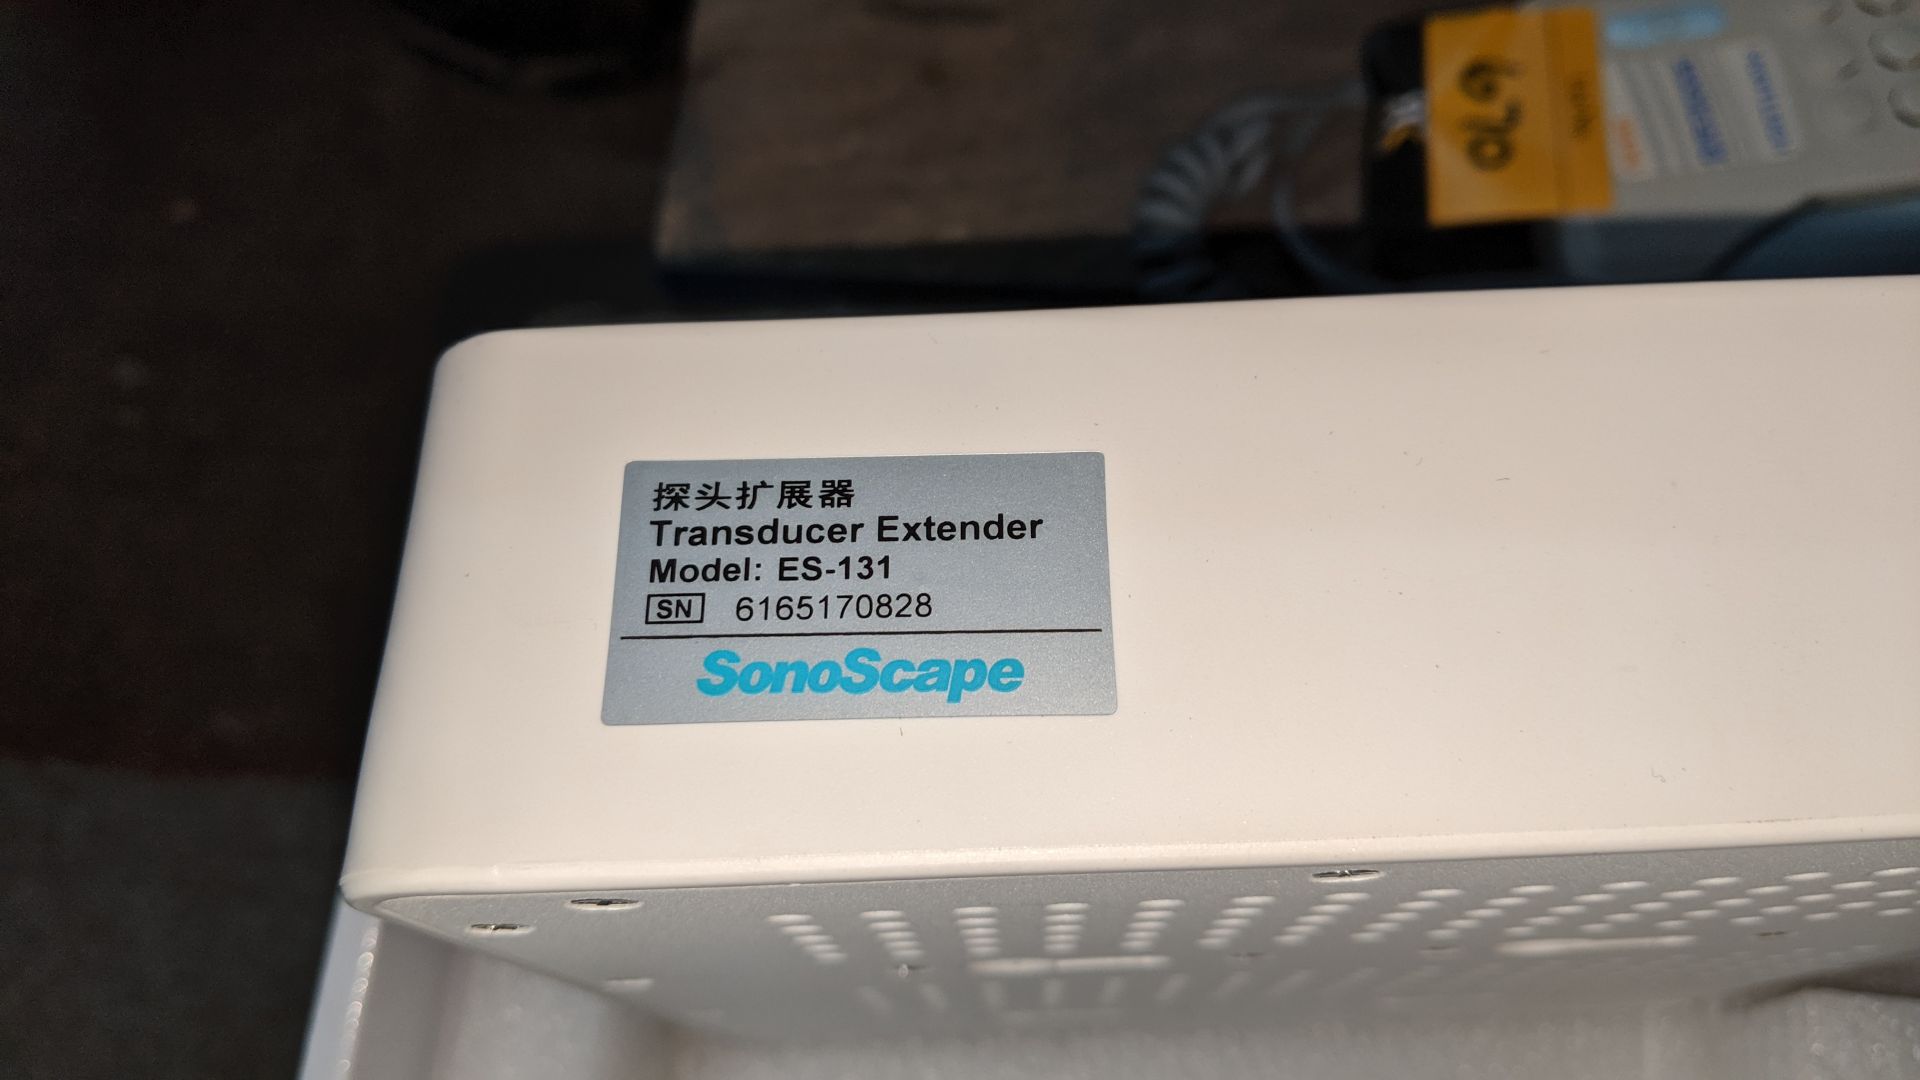 SonoScape model ES-131 transducer extender with box. This is one of a large number of lots used/ - Image 3 of 5